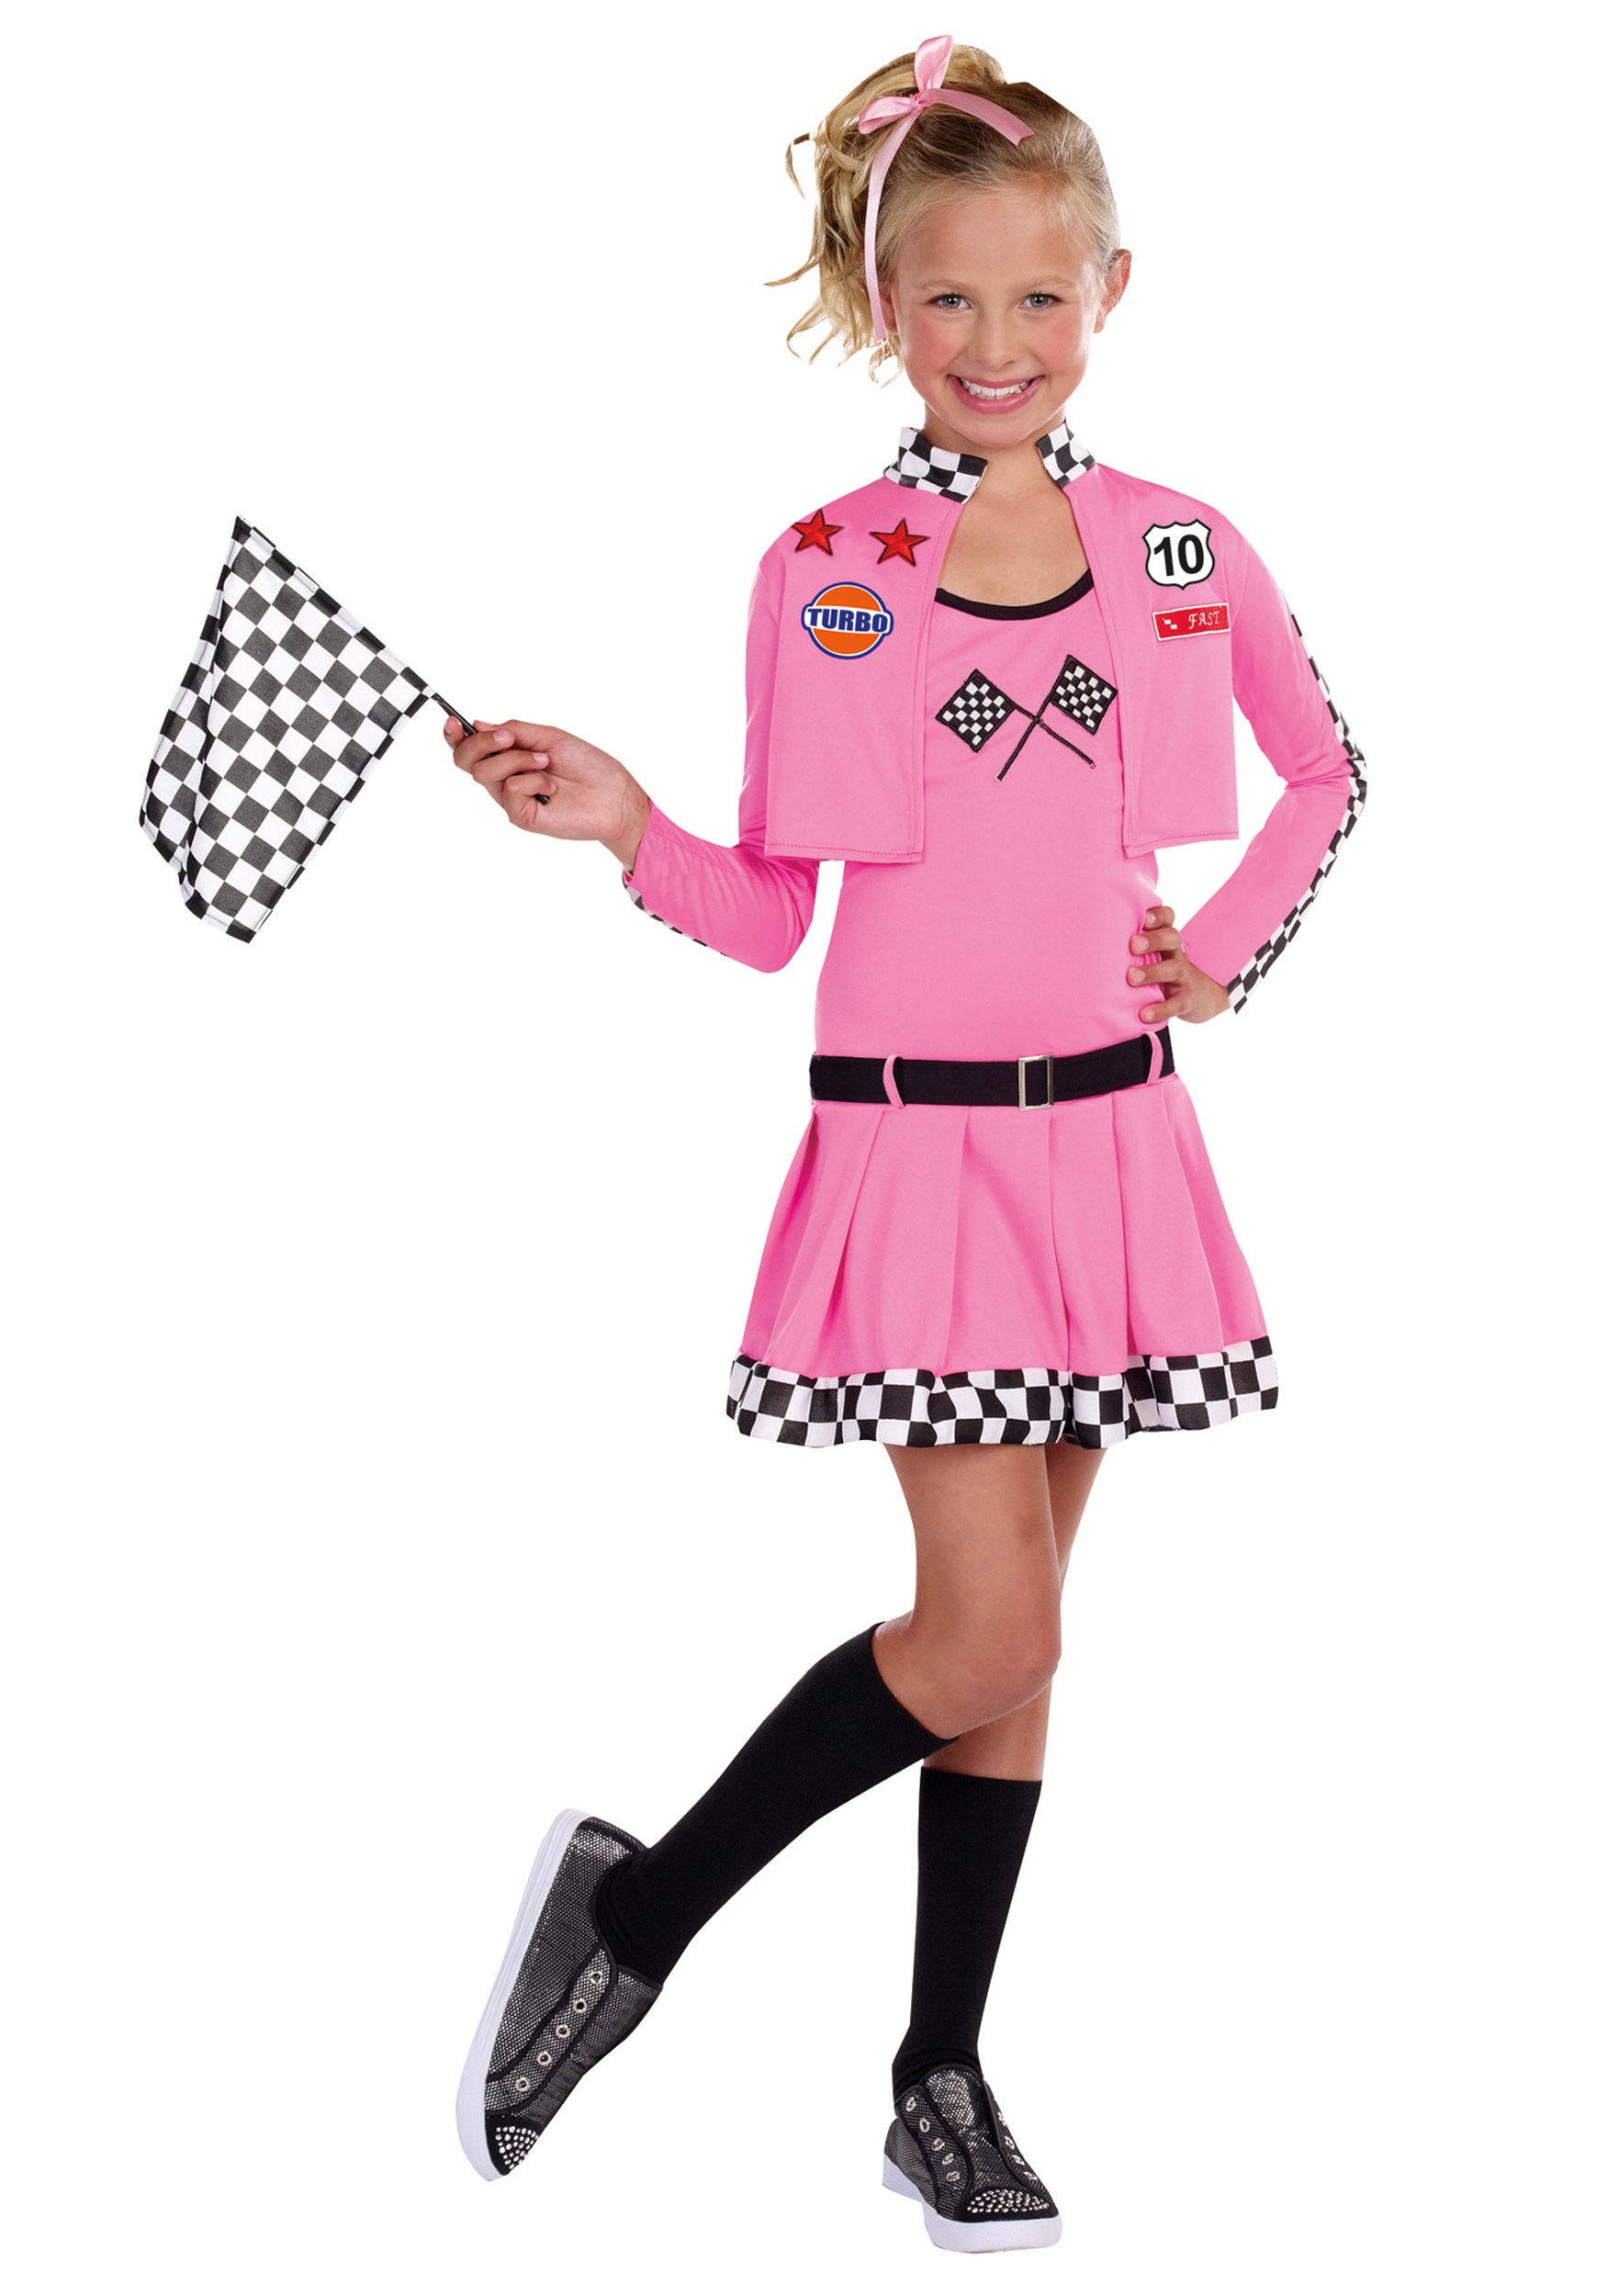 Girls Sweet Racer Costume | This Girls Sweet Racer Costume is perfect for y...